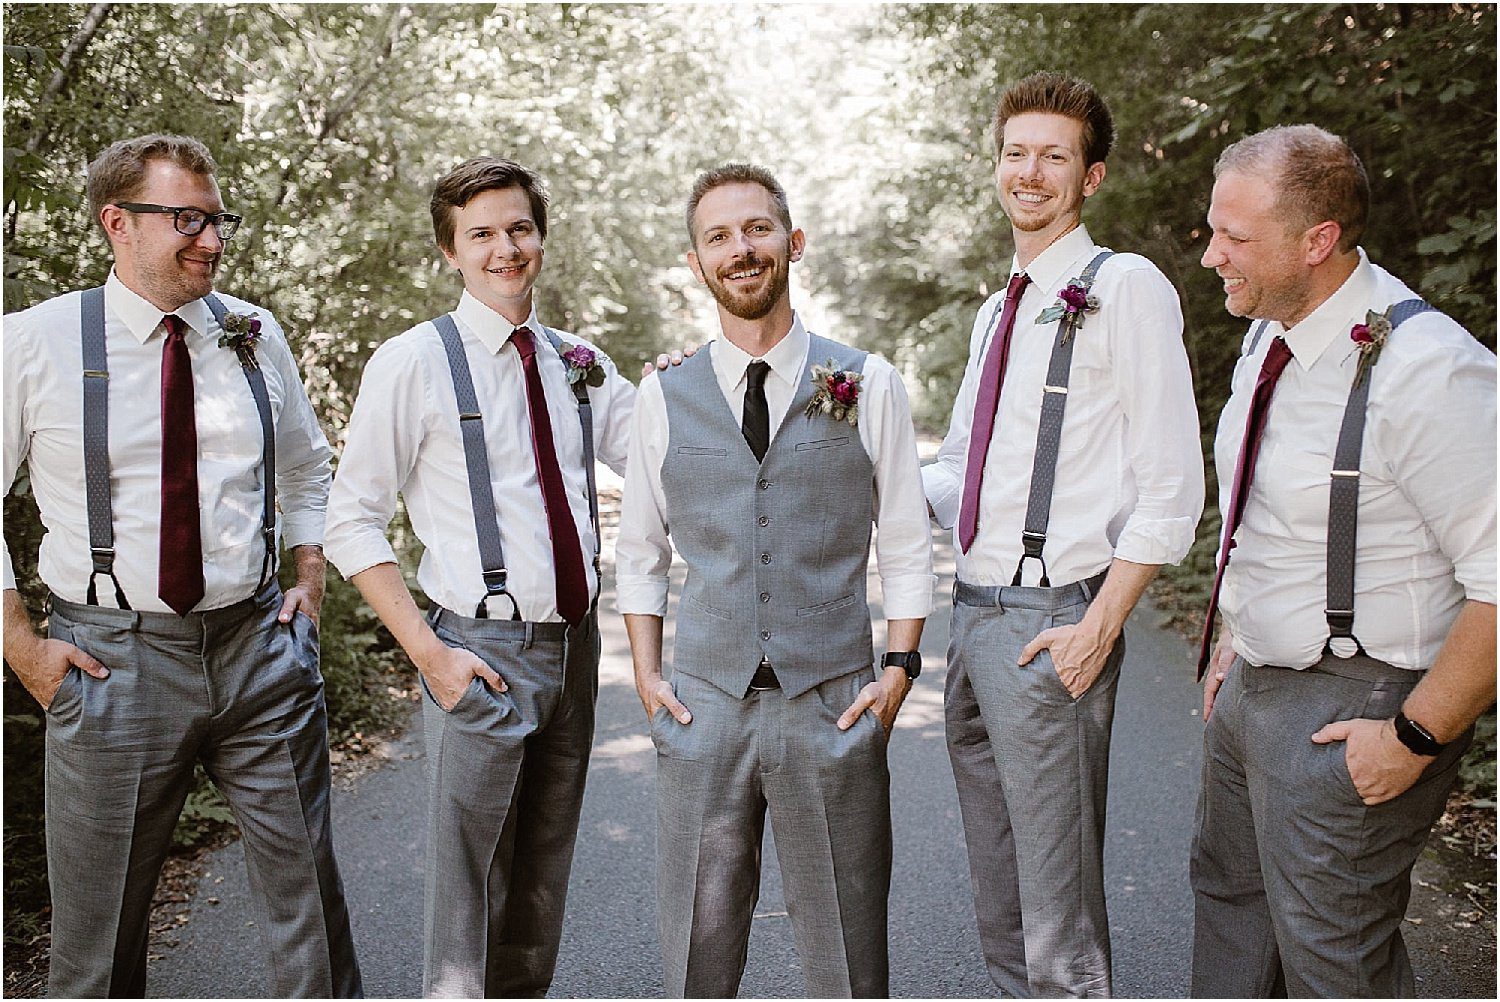 Groom and Groomsmen Photos at The Barn at Chestnut Springs